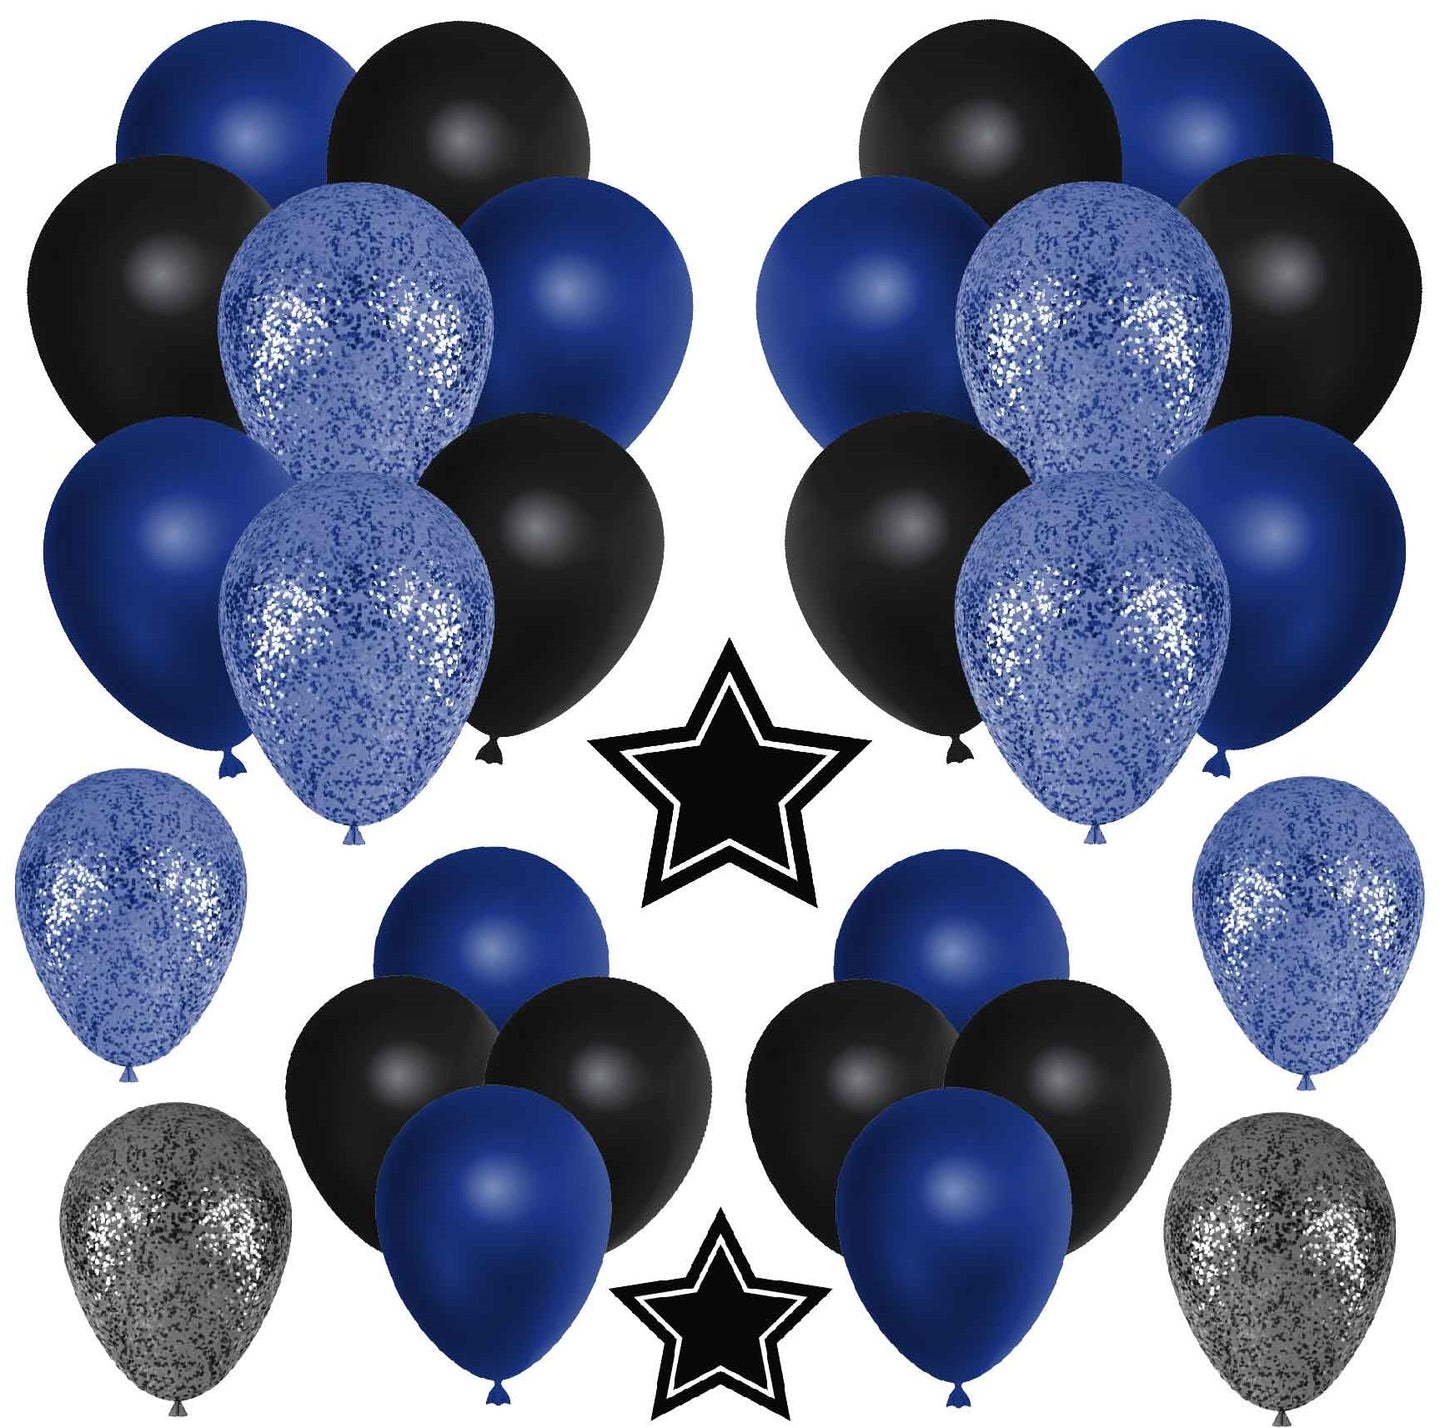 Blue and Black Balloons Half Sheet Misc. (Must Purchase 2 Half sheets - You Can Mix & Match)